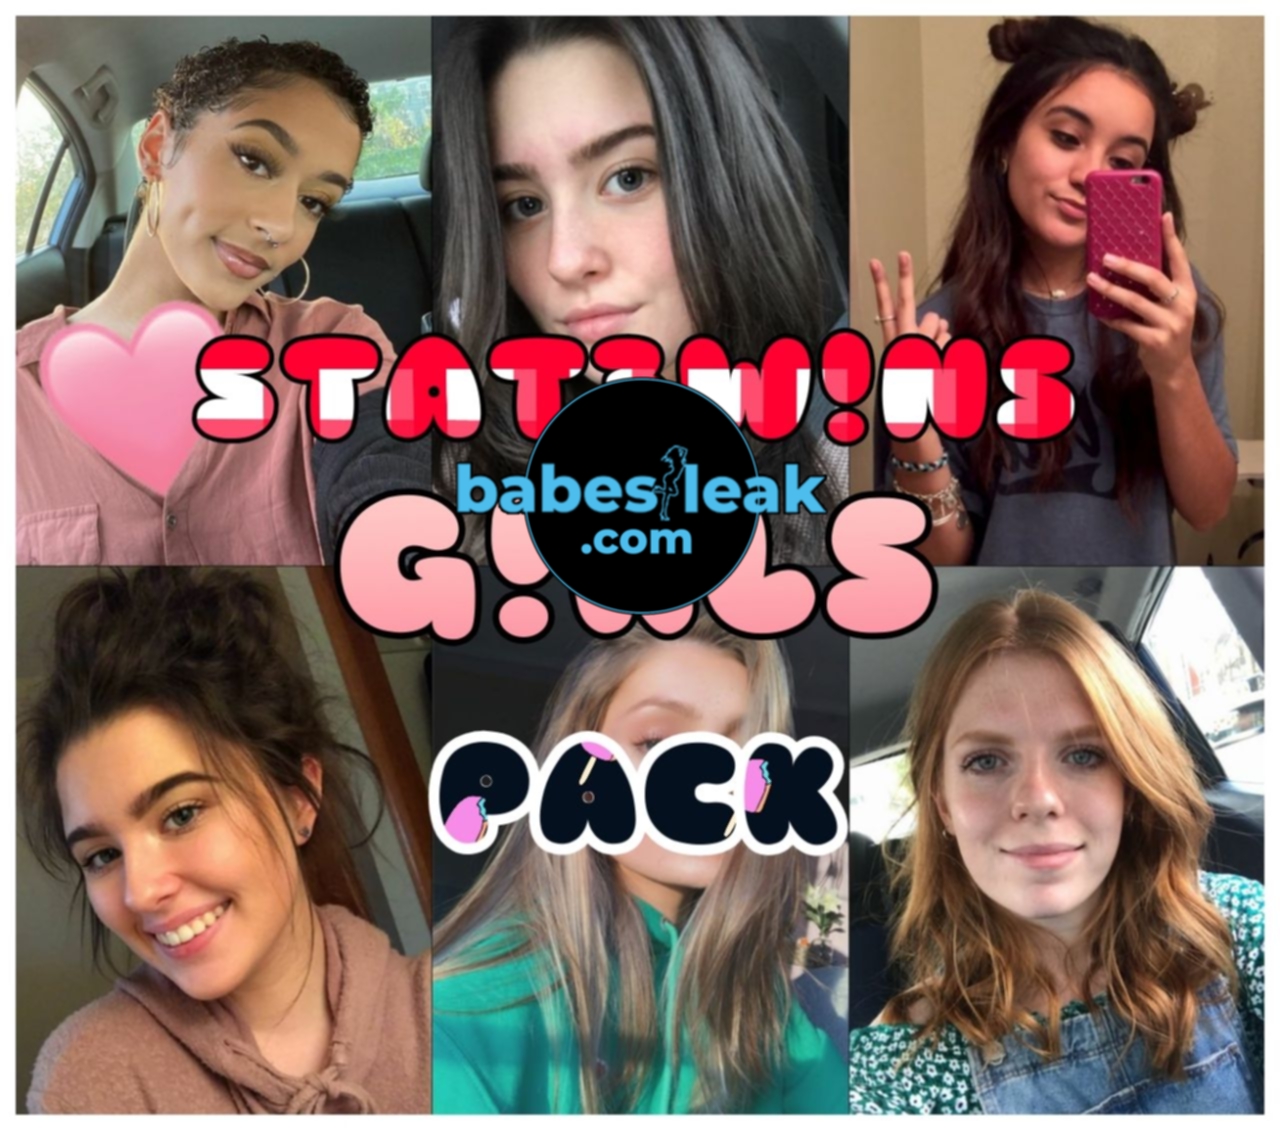 Premium 13 Statewins Girls Pack Stw051 Onlyfans Leaks Snapchat